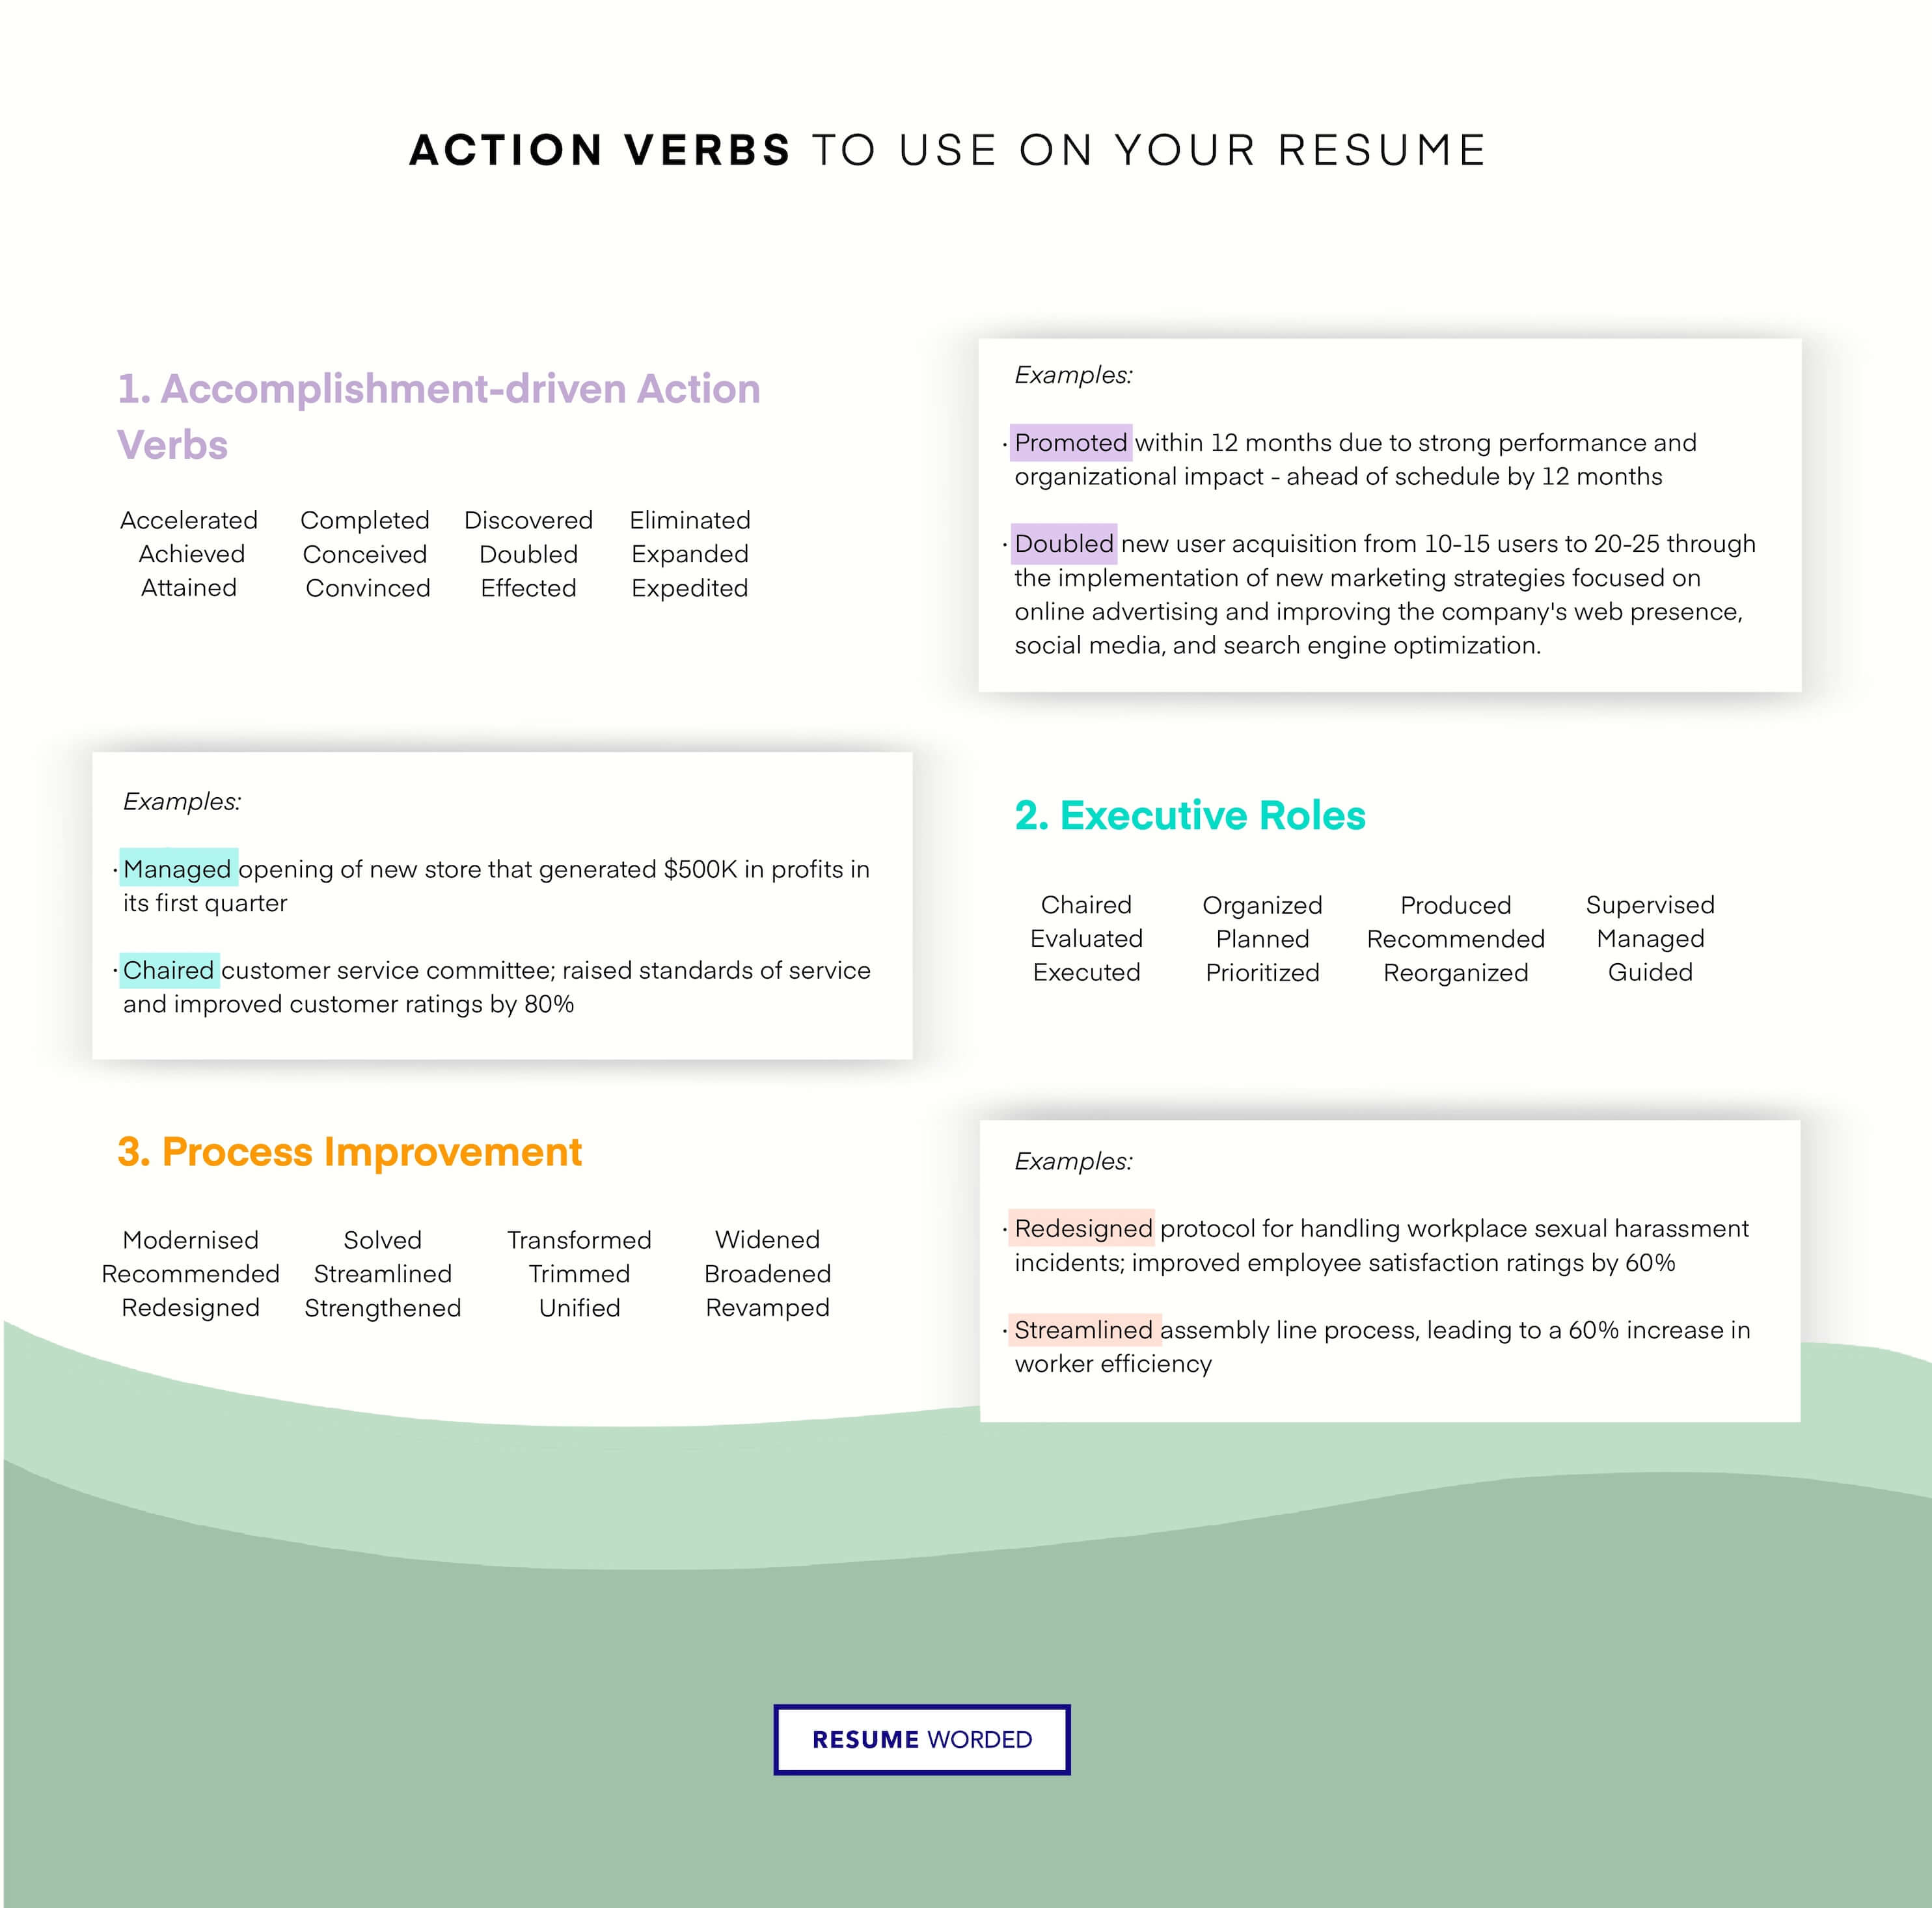 Bullet points feature strong action verbs - Laboratory Research Assistant Resume